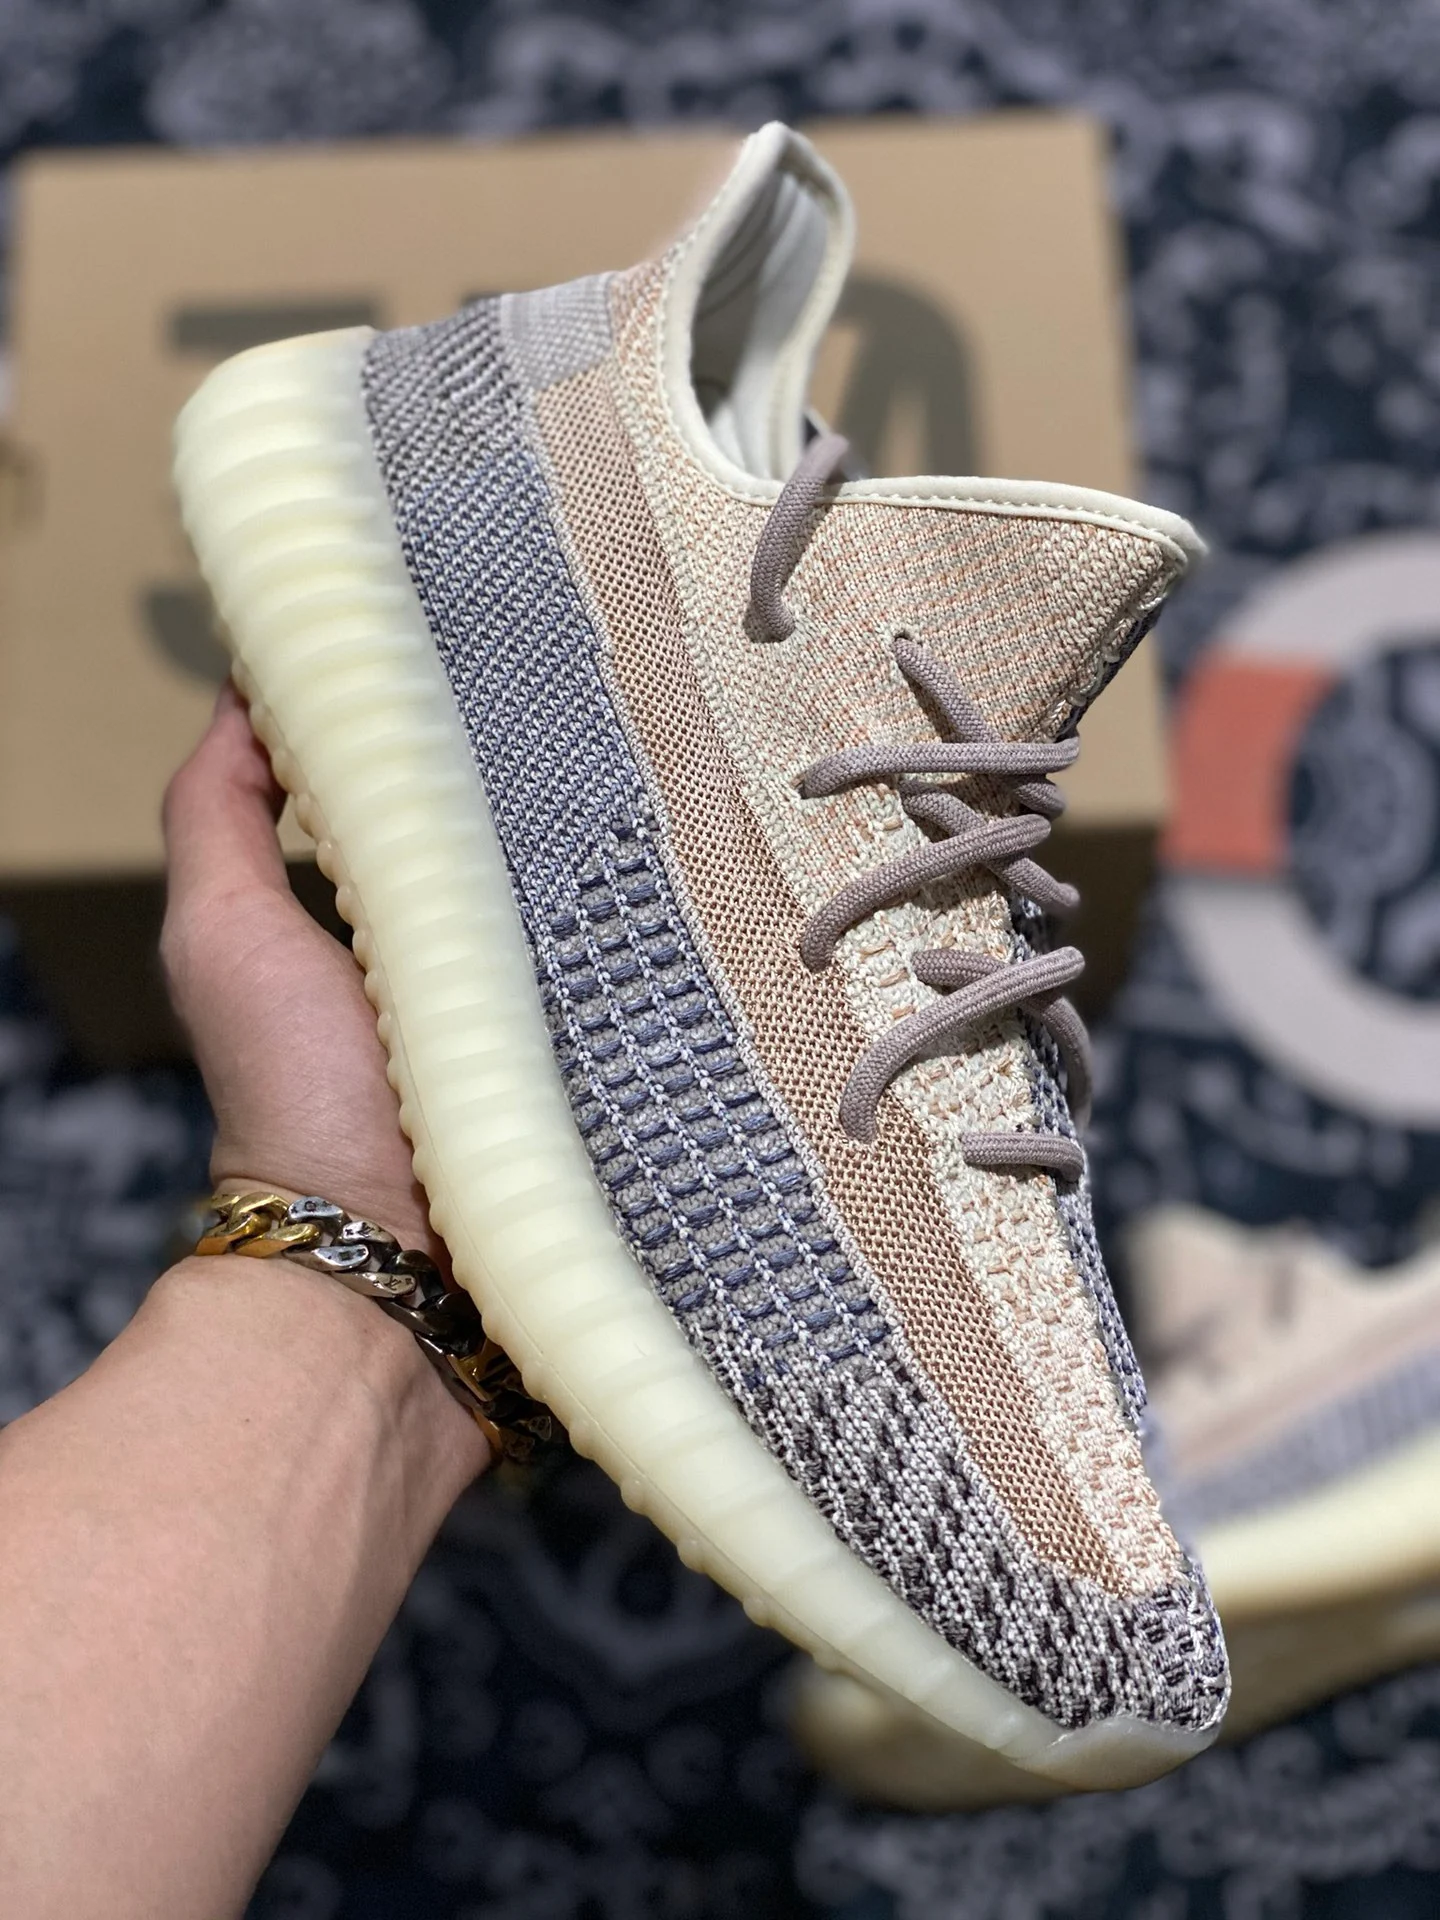 Adidas Yeezy Boost 350 v2 Ash Pearl GY7658 For Sale